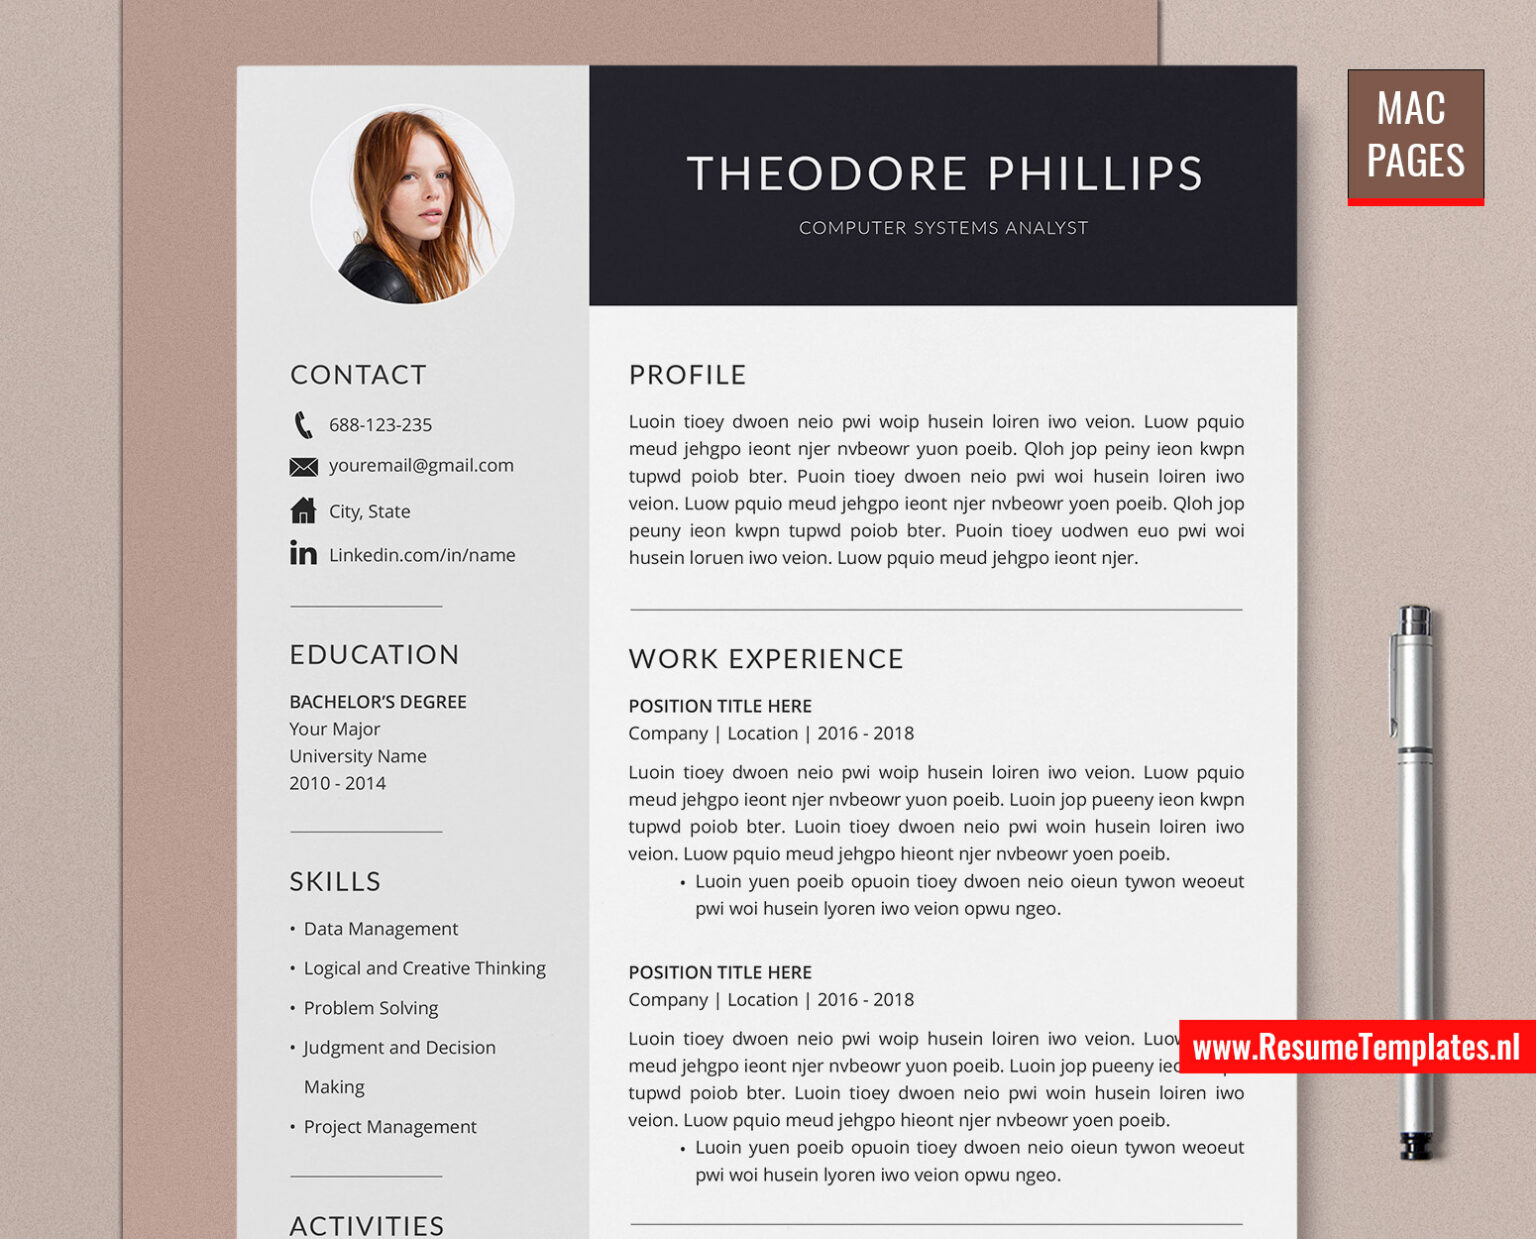 For Mac Pages: Professional CV Template for Mac Pages with Cover